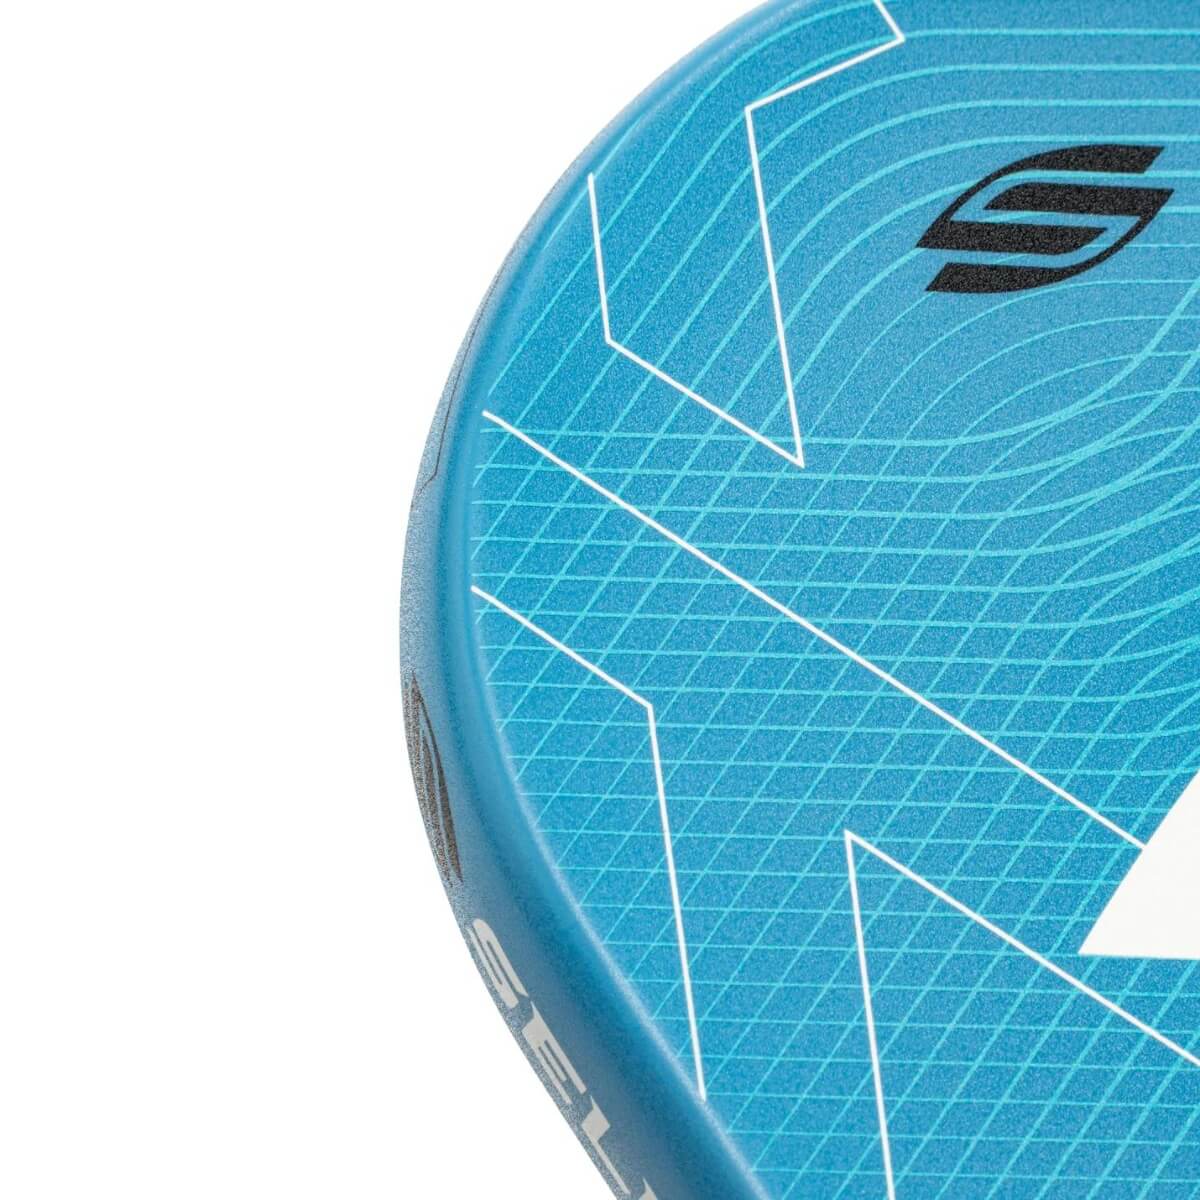 Selkirk Luxx Control Air Epic Blue Pickleball paddle face